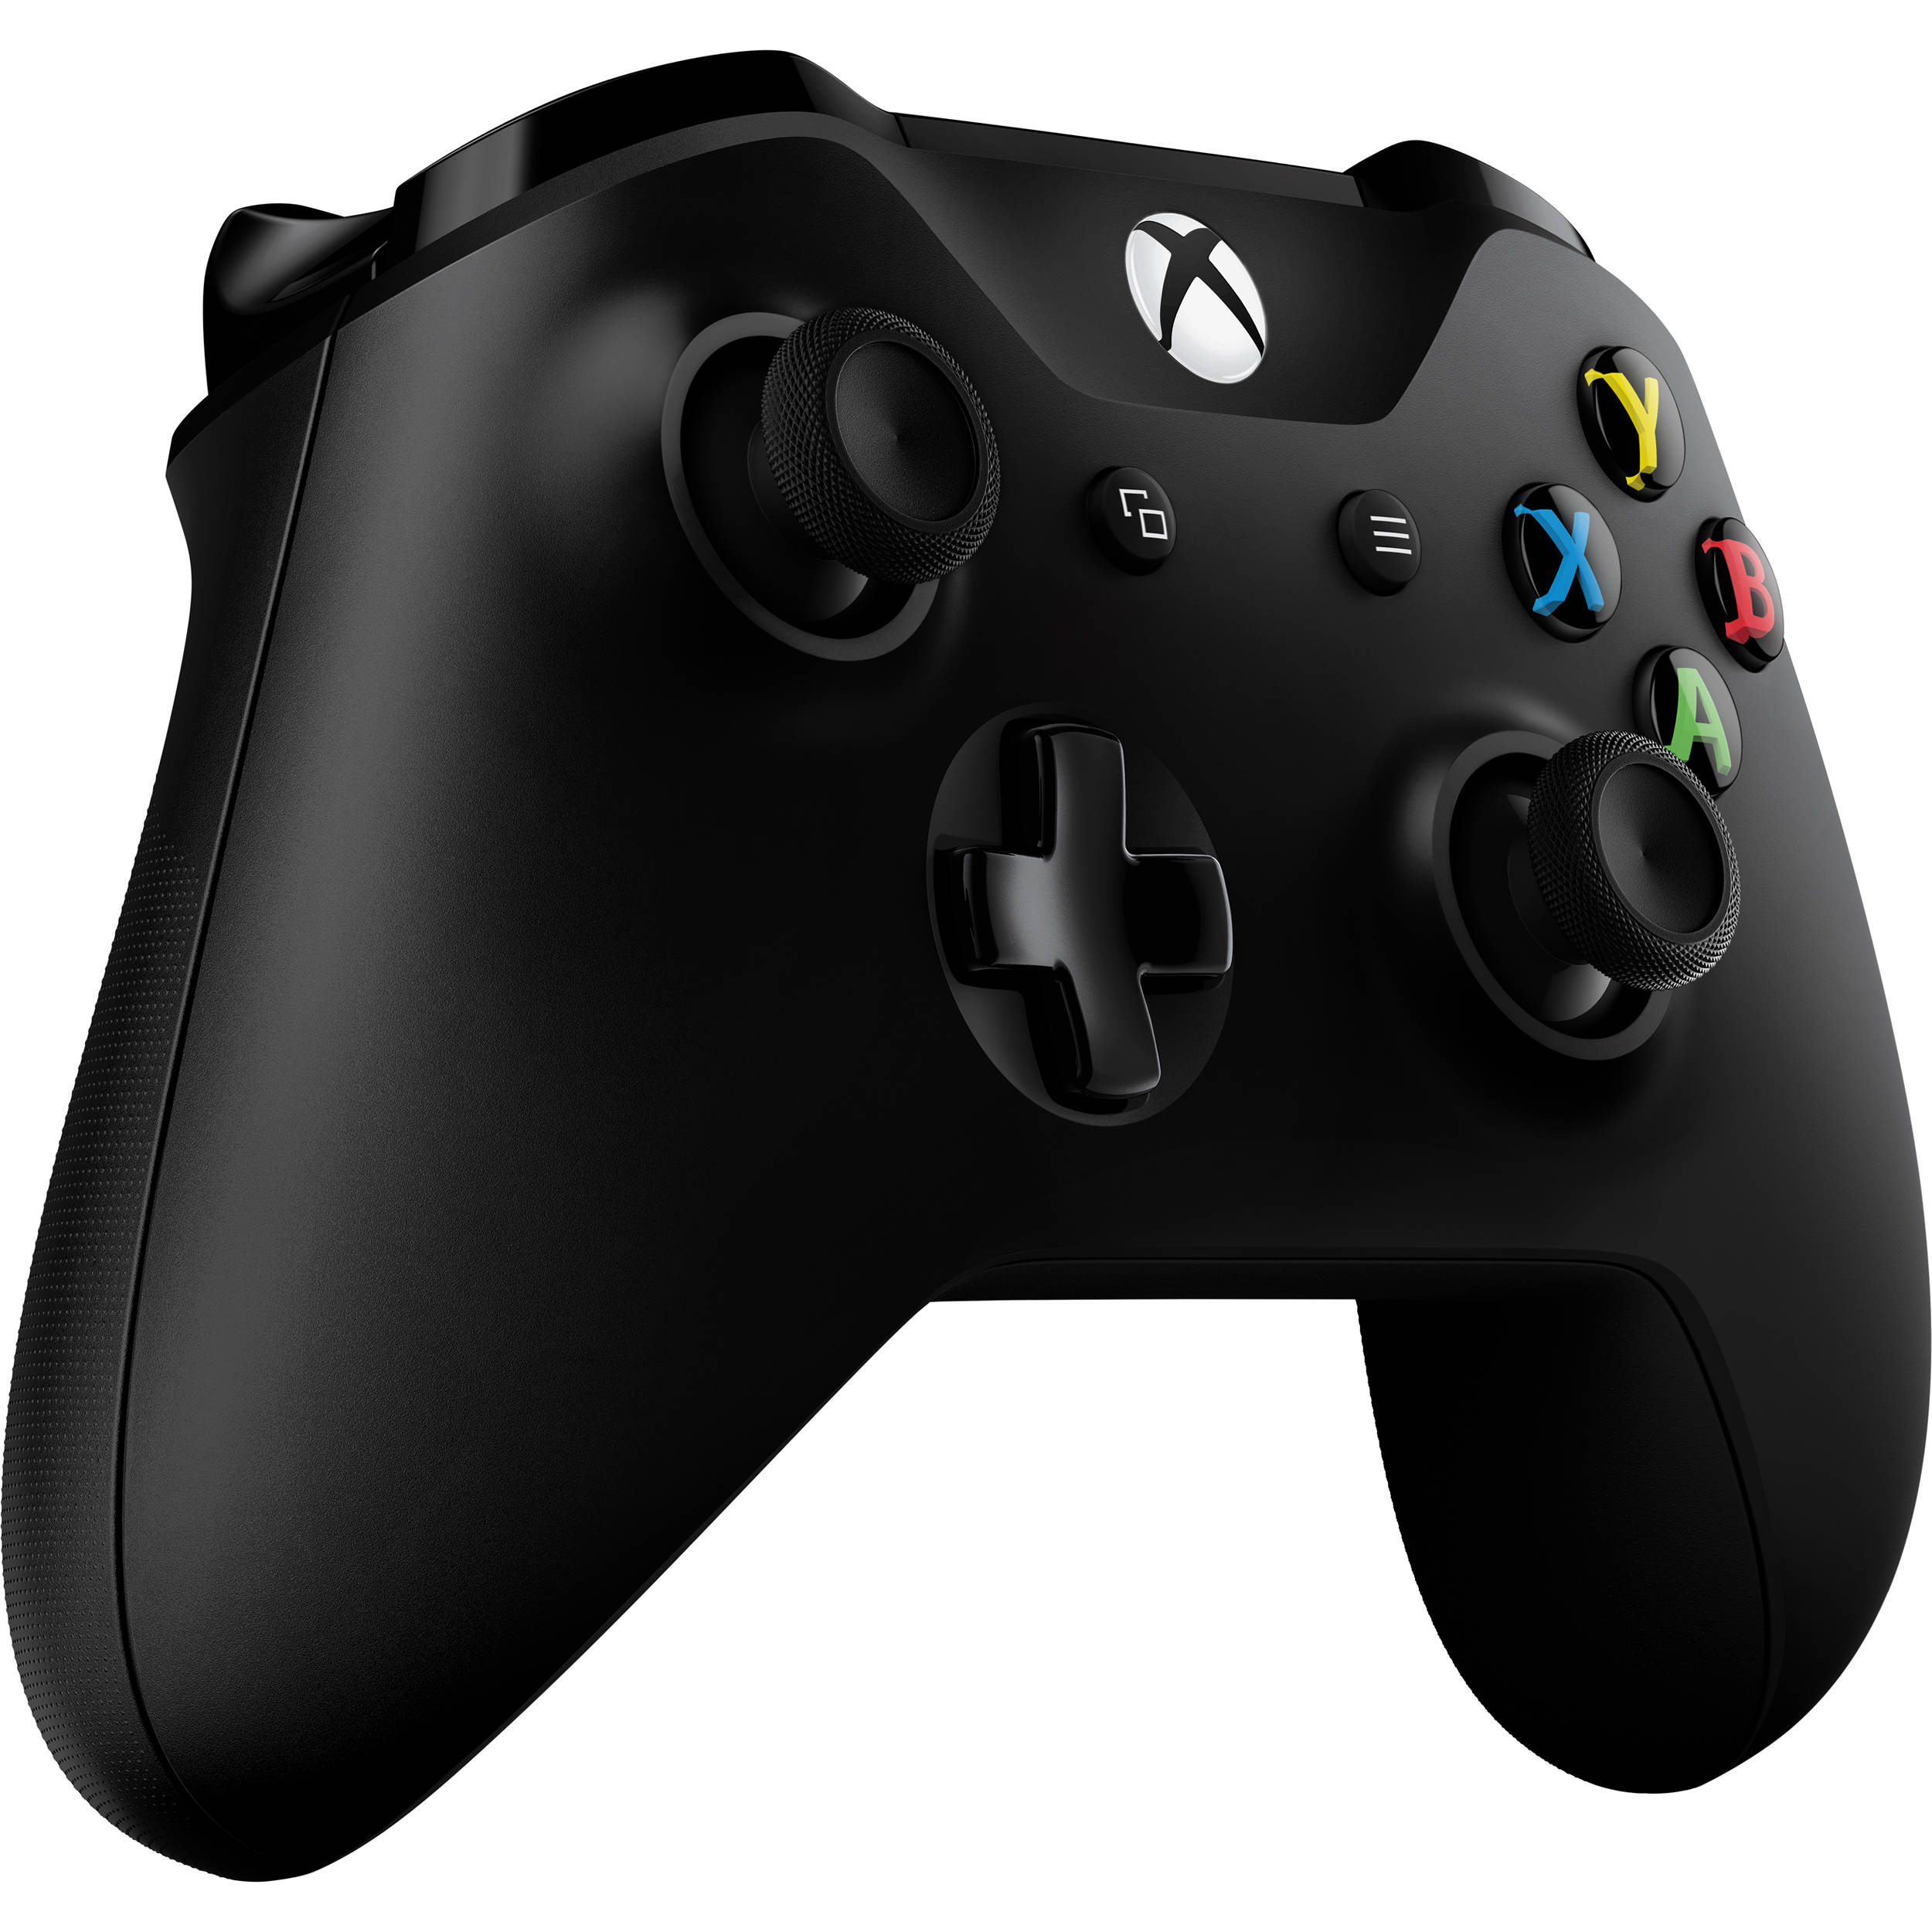 download driver controller xbox 360 windows 10